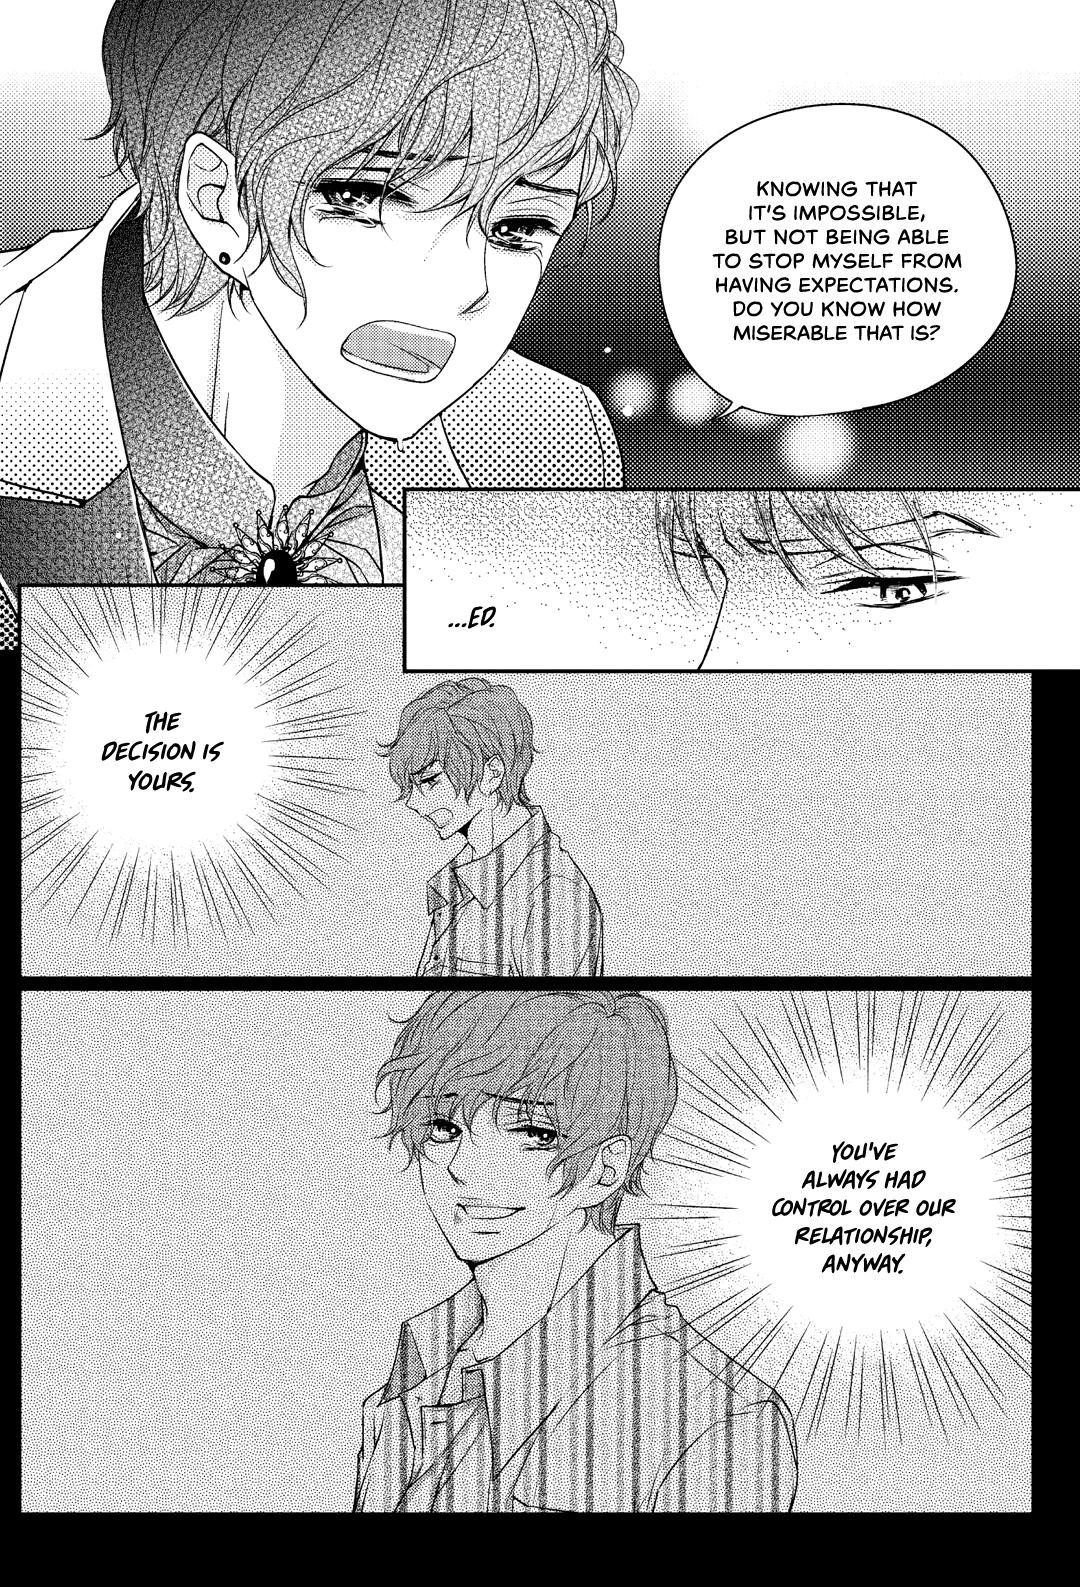 He And His Dating Style chapter 8 - page 17